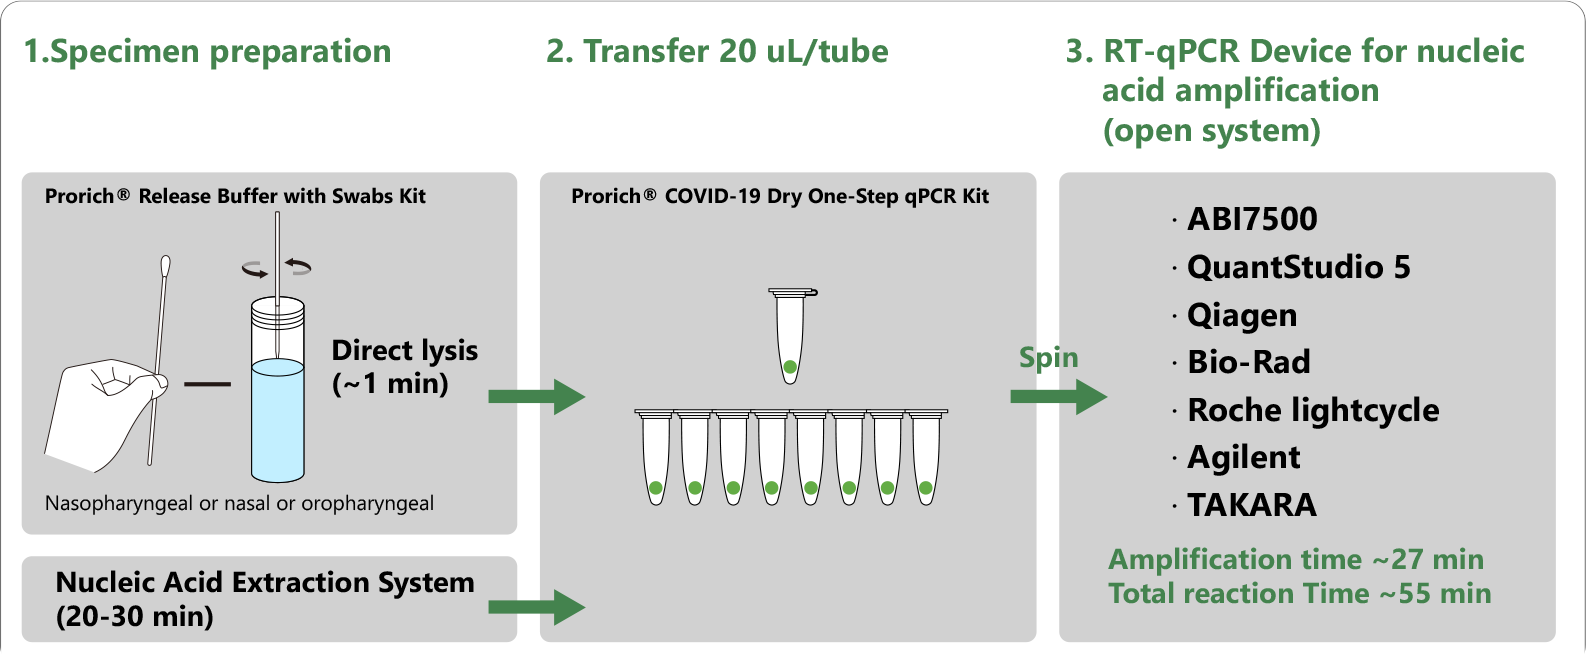 Prorich® COVID-19 Dry One-Step RT-qPCR Kit using step